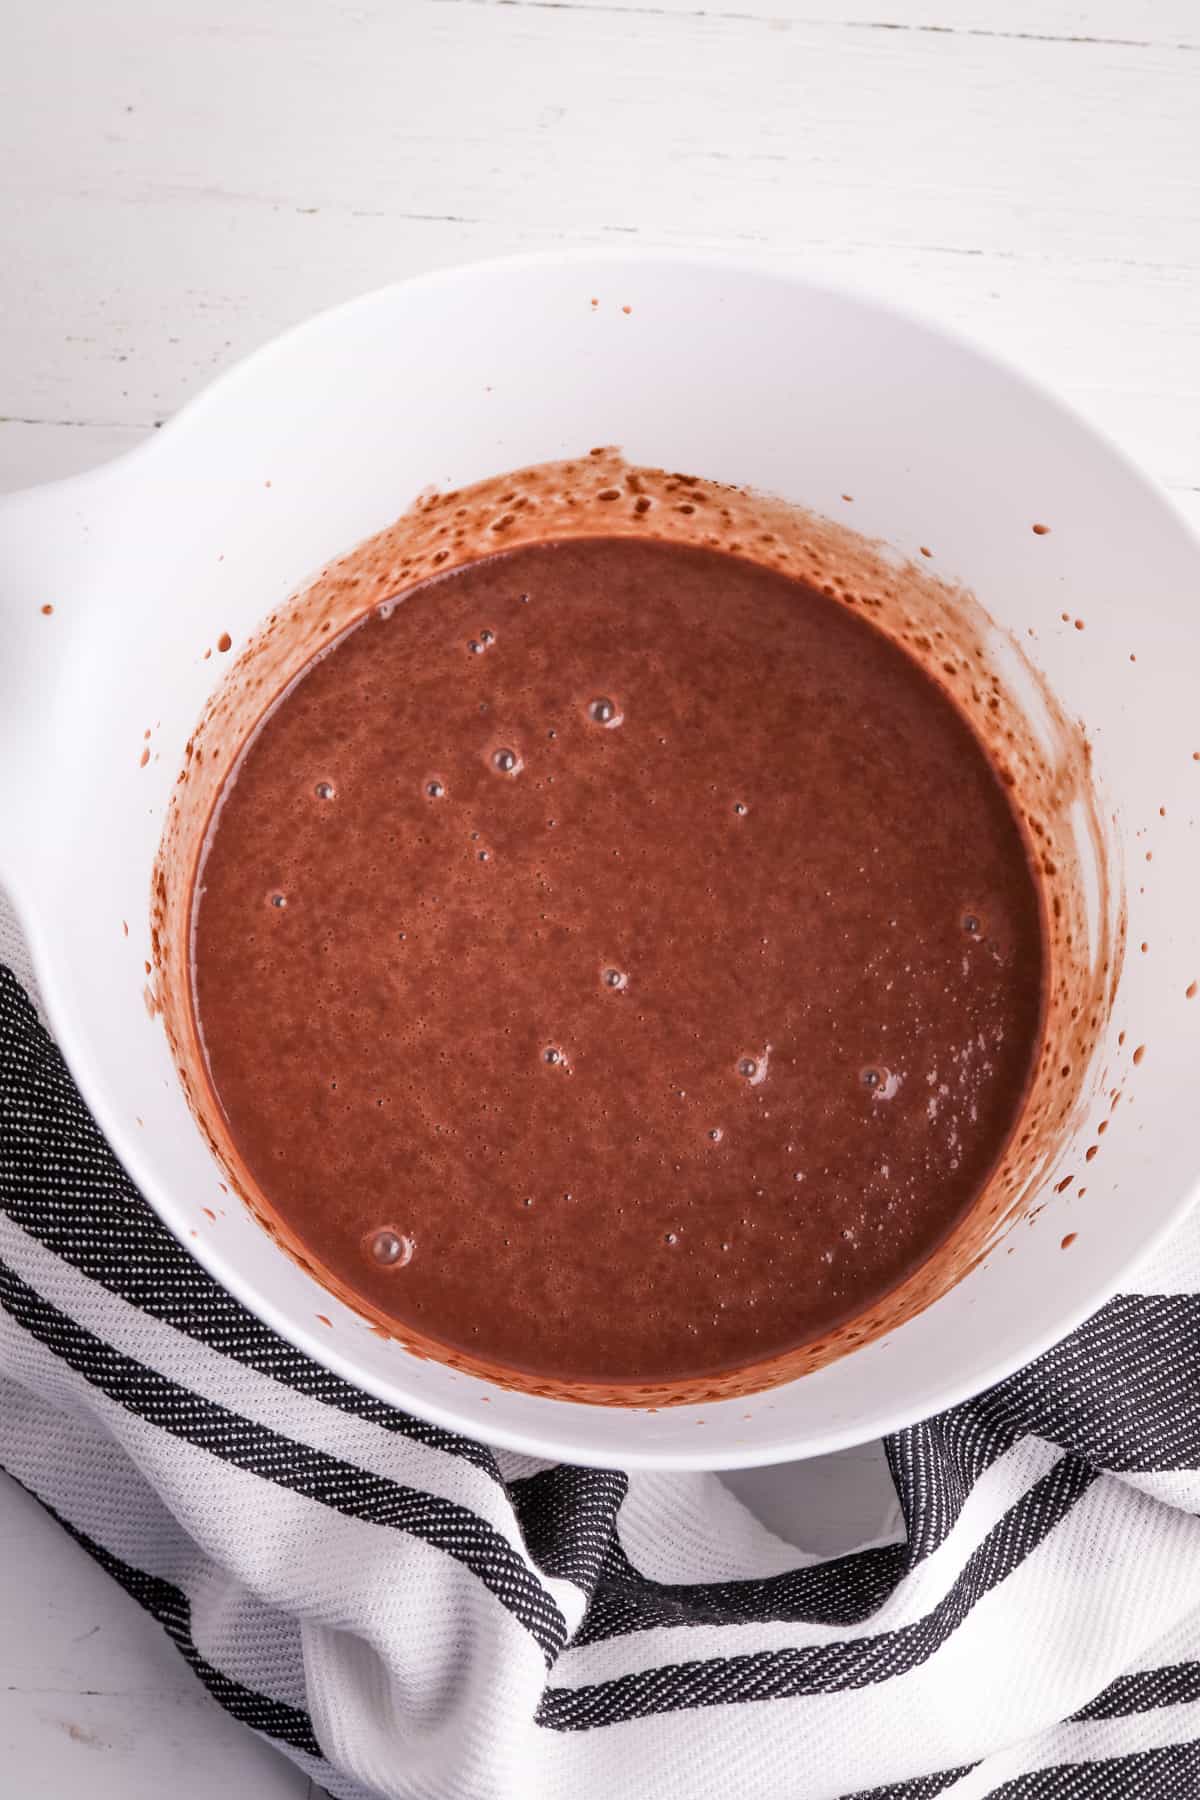 Chocolate pudding in mixing bowl.